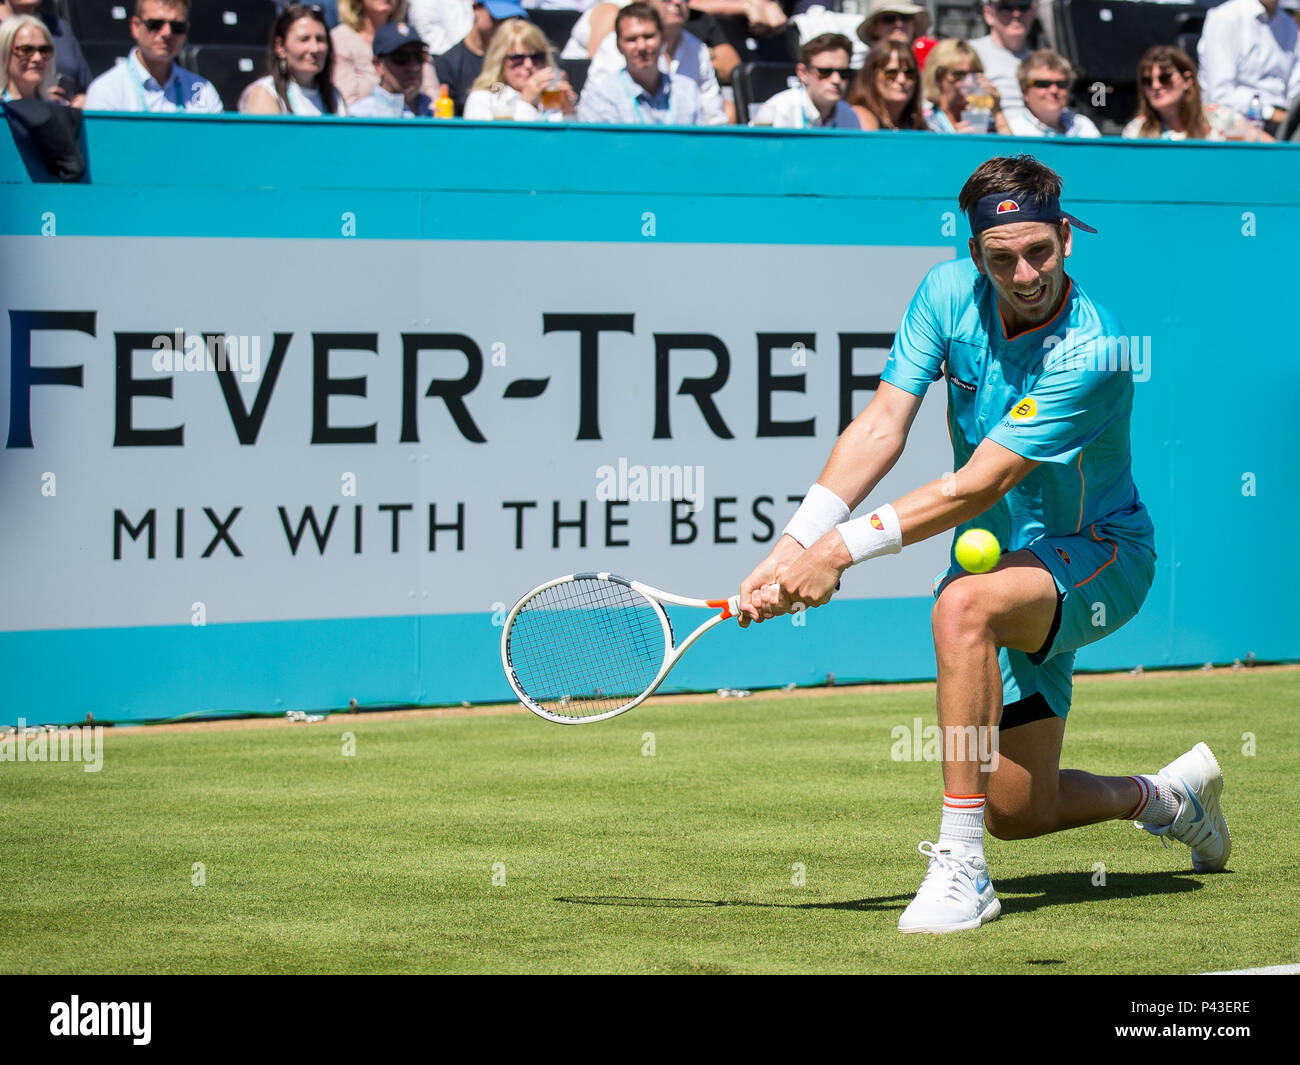 Cameron Norrie of GBR during Day 3 of the Fever Tree Tennis Championships  at The Queen's Club, London, England on 18 June 2018. Photo by Andy Rowland  Stock Photo - Alamy